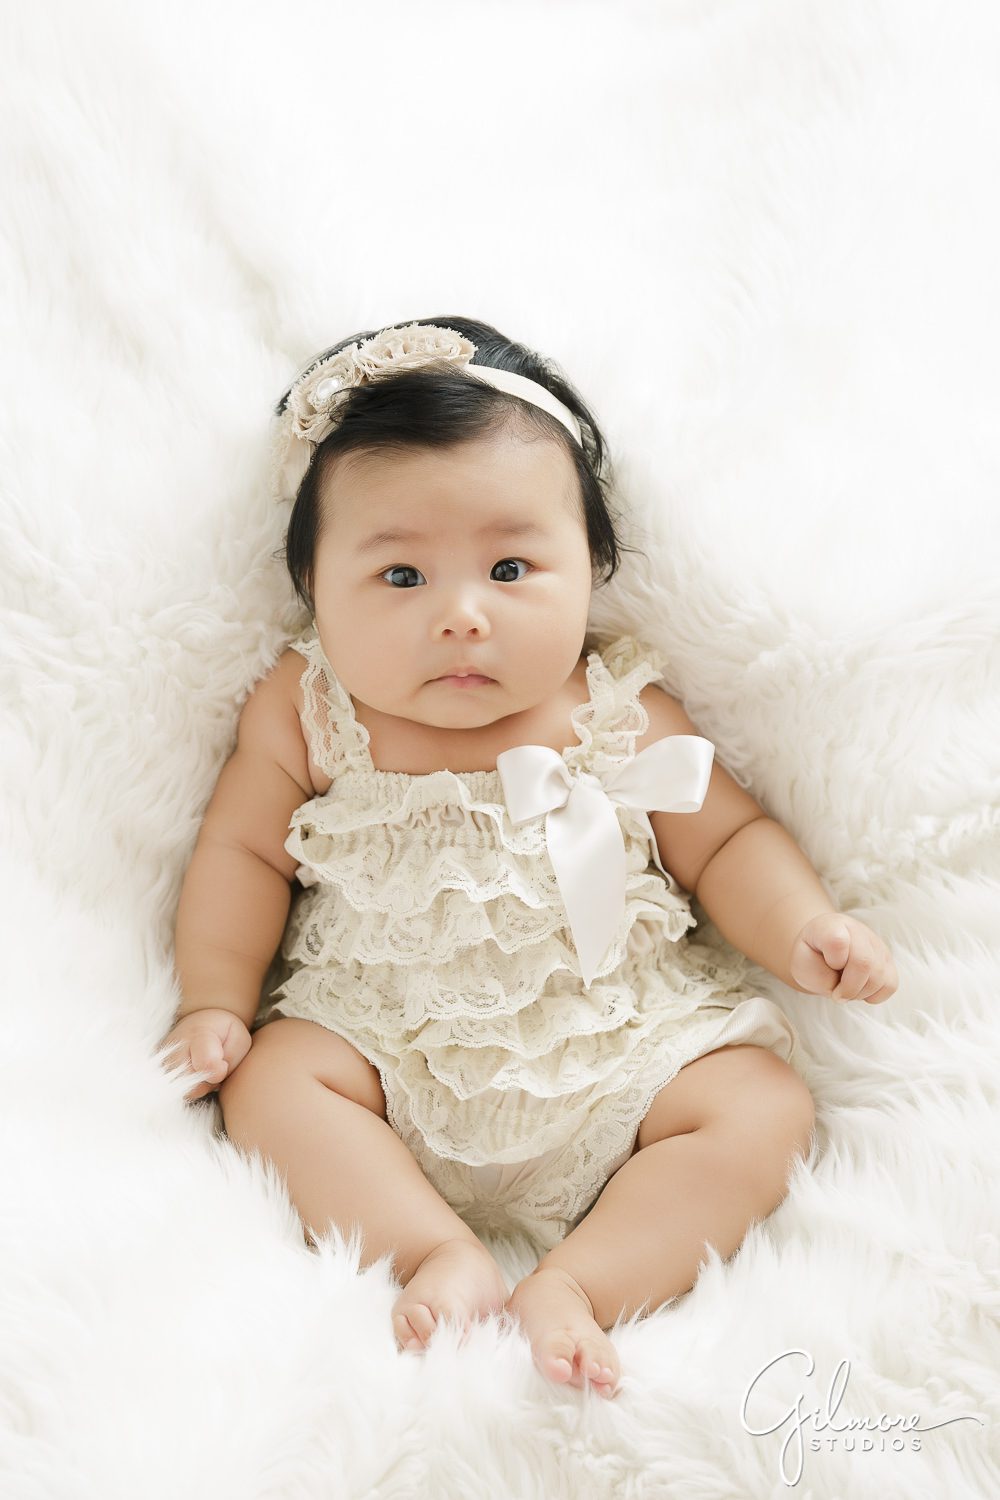 100 Days Baby Photography Session, white blanket, newborn, lace headband, dress, ribbon, floral